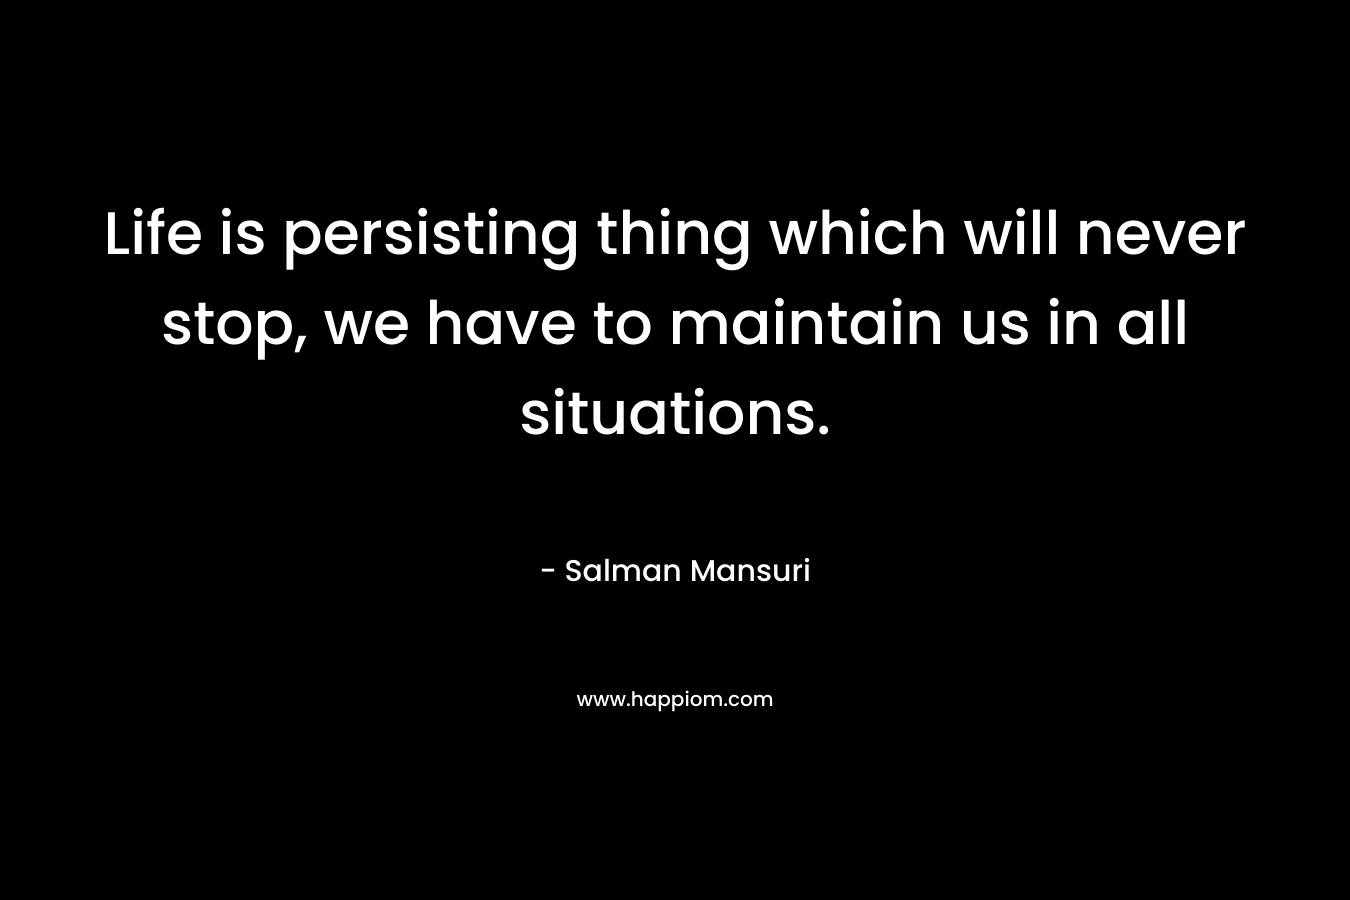 Life is persisting thing which will never stop, we have to maintain us in all situations. – Salman Mansuri